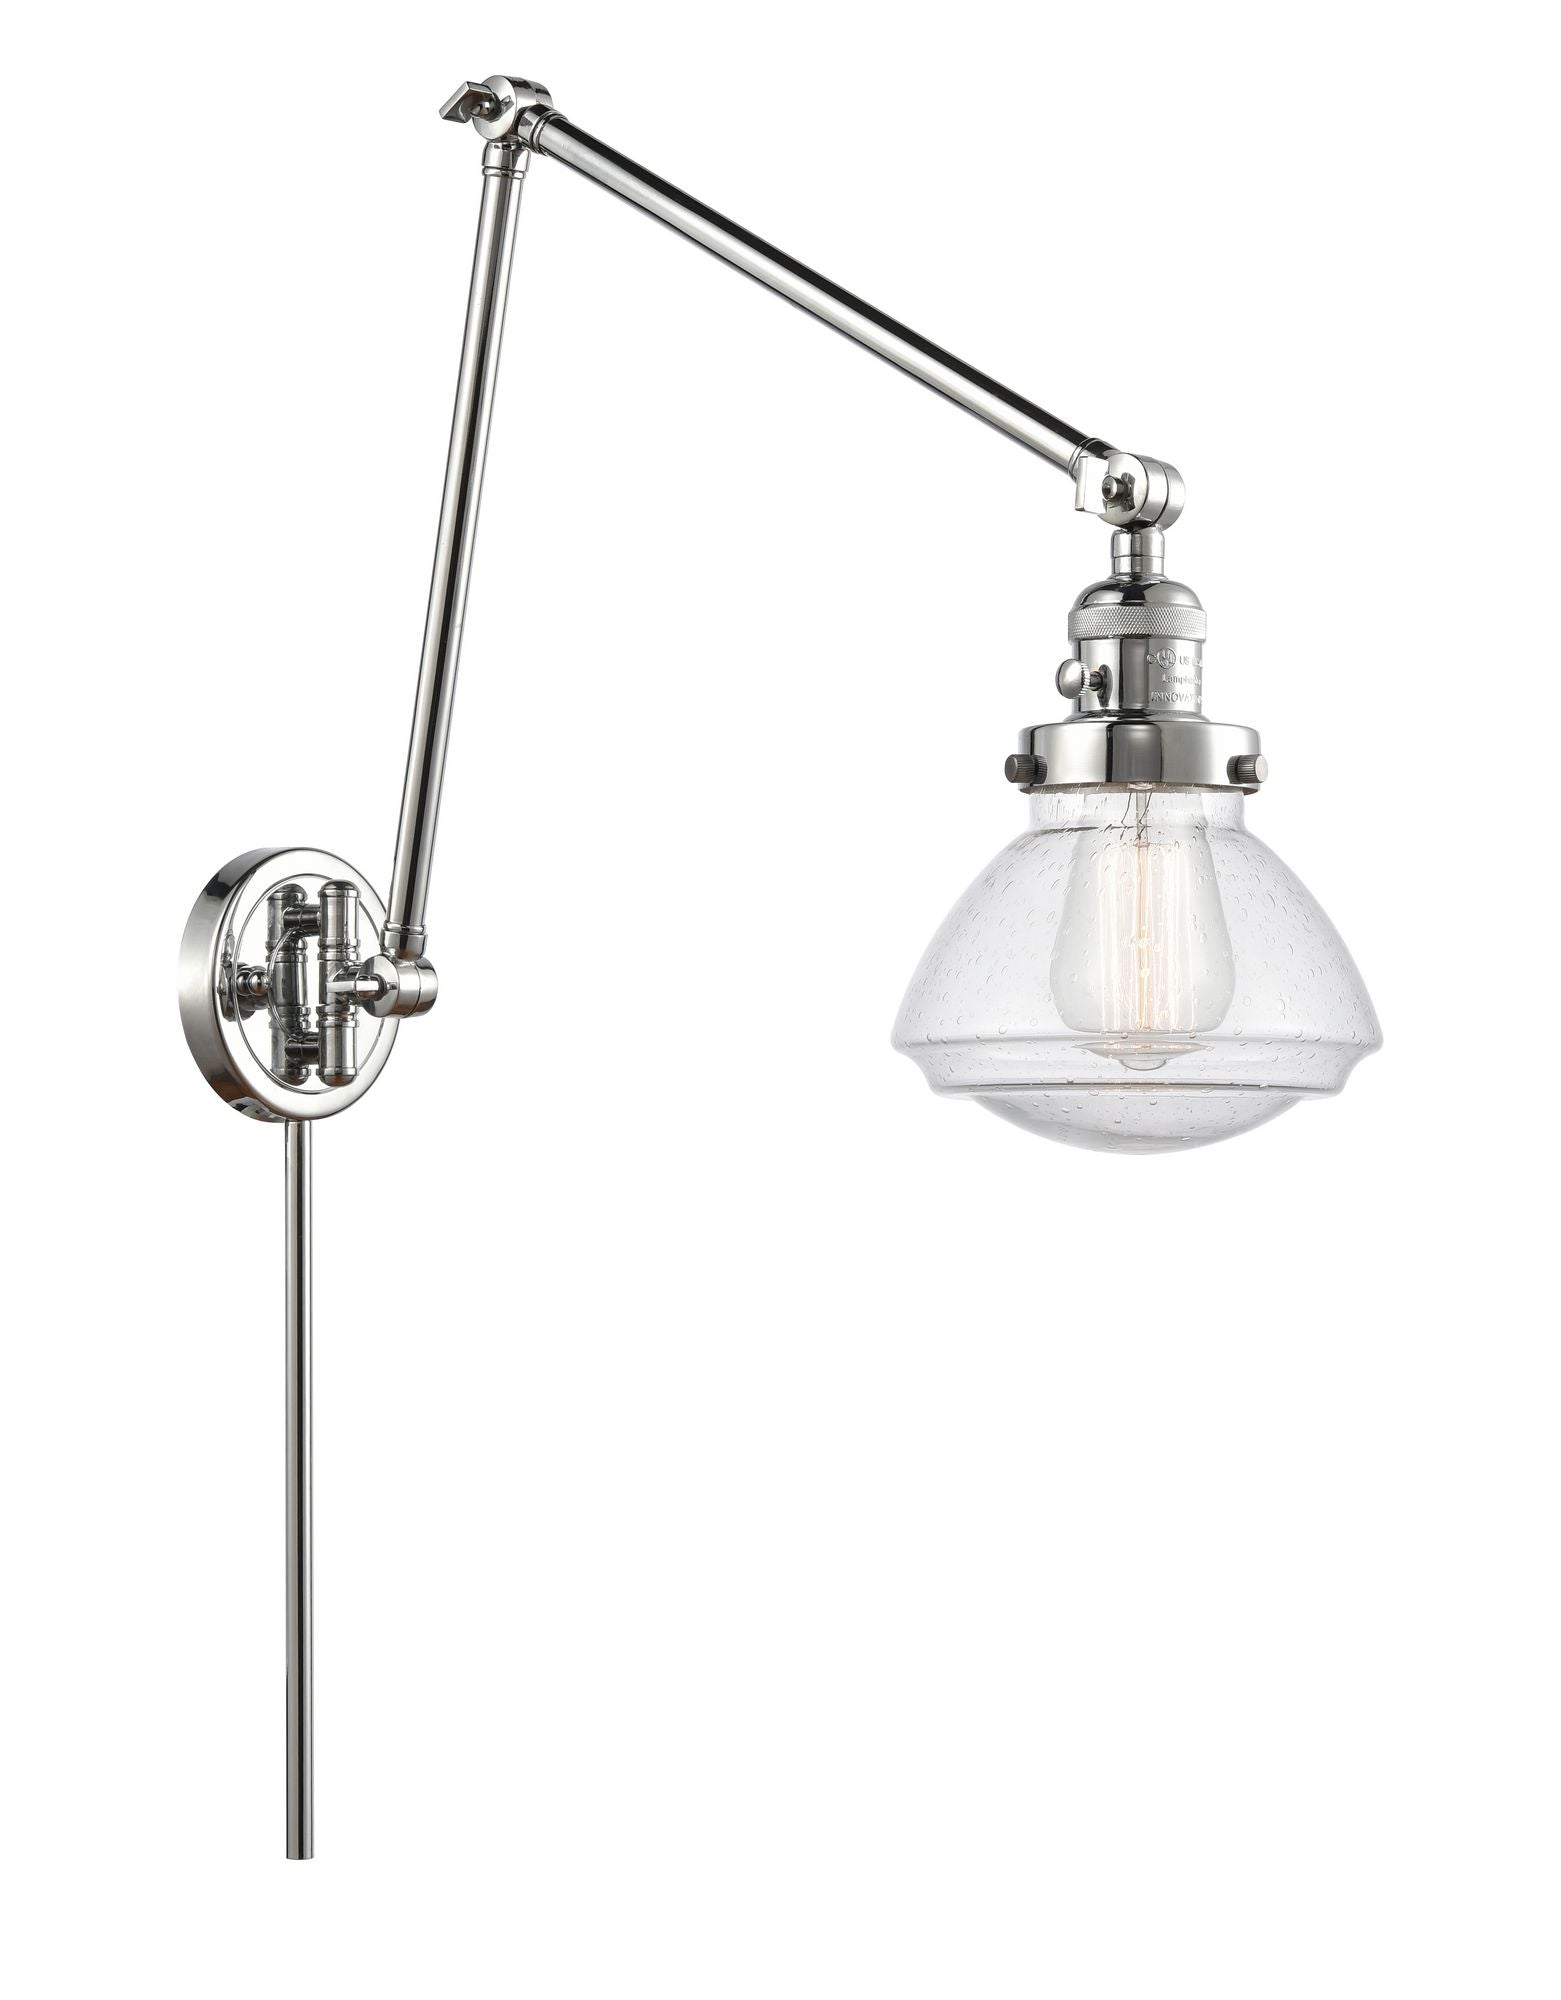 238-PC-G324 1-Light 8.75" Polished Chrome Swing Arm - Seedy Olean Glass - LED Bulb - Dimmensions: 8.75 x 28.125 x 27.75 - Glass Up or Down: Yes